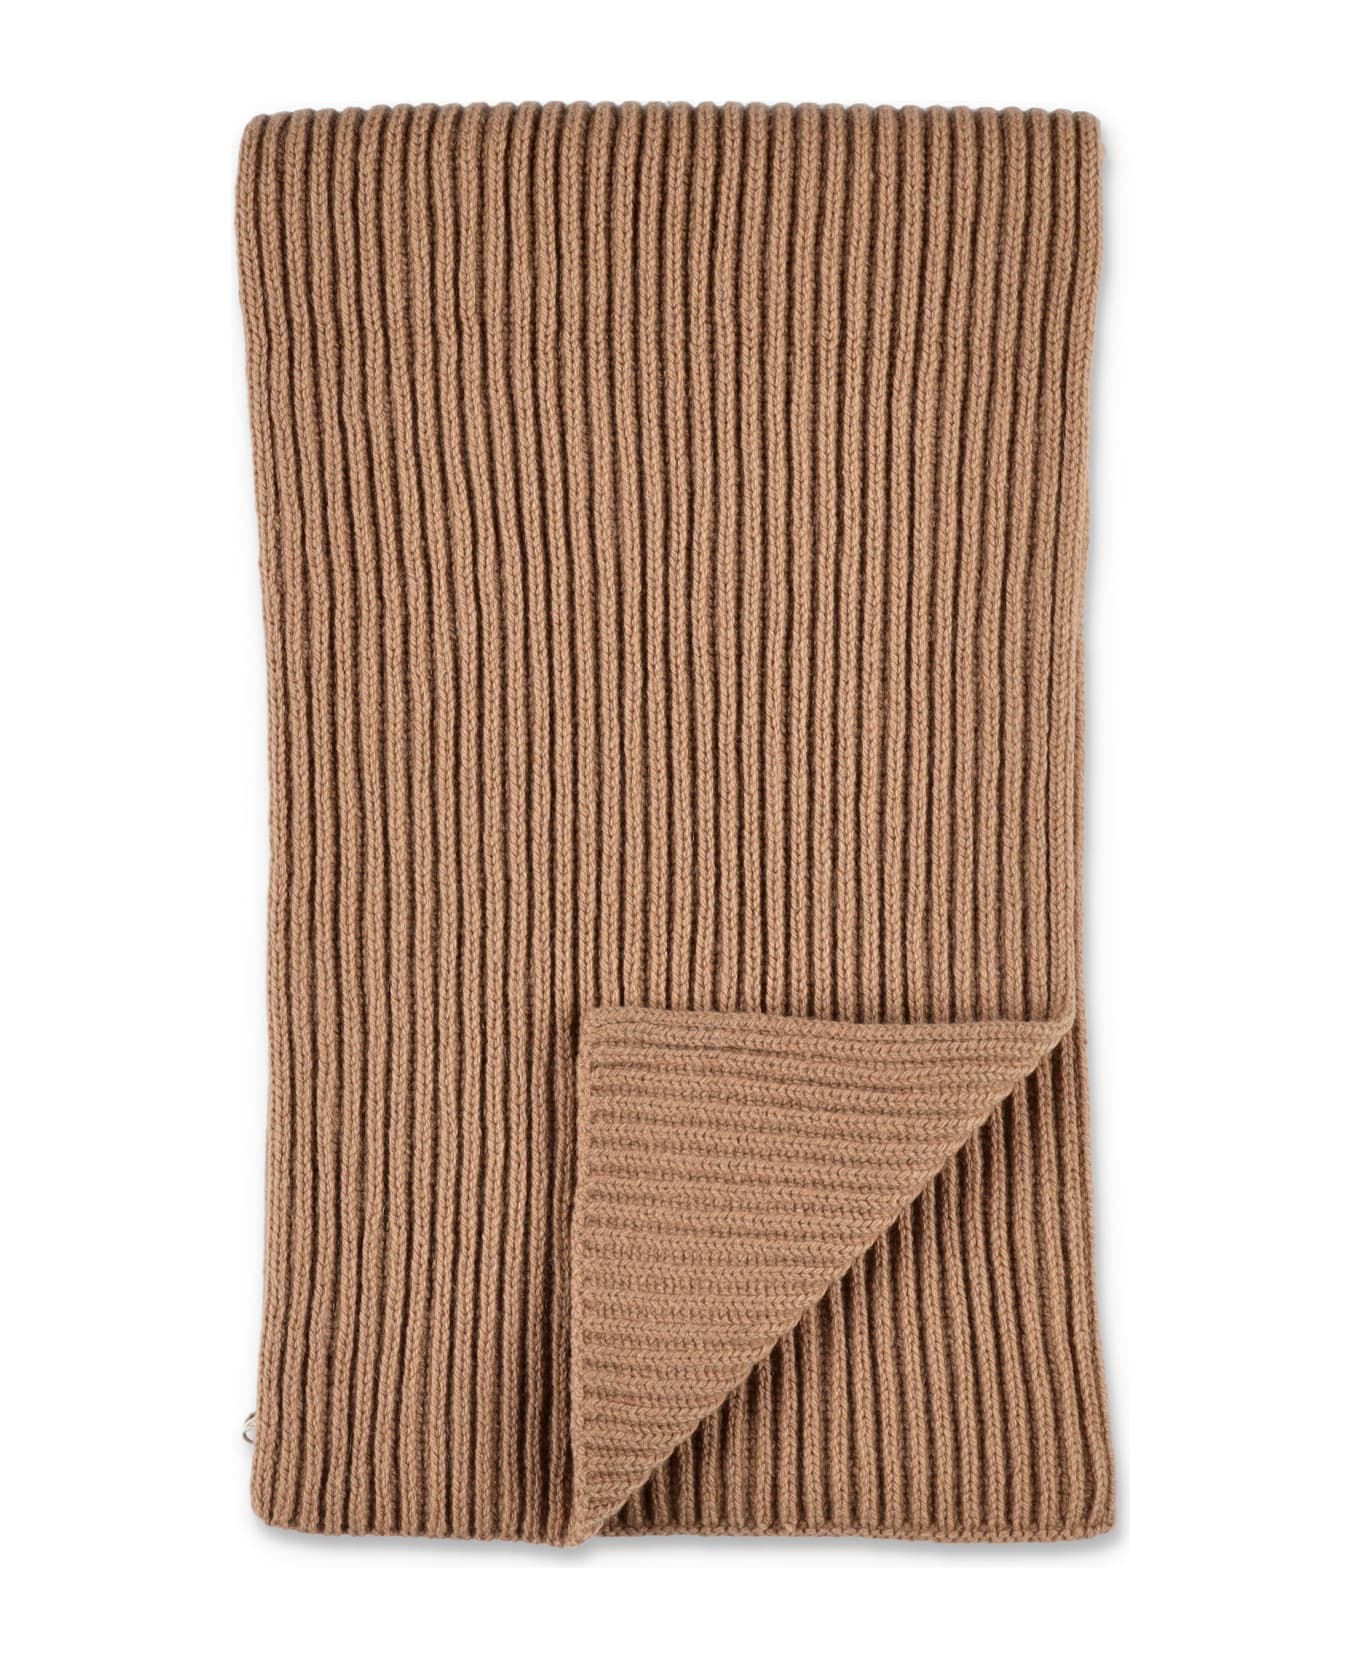 A.P.C. Camille Ribbed Scarf - CAMEL